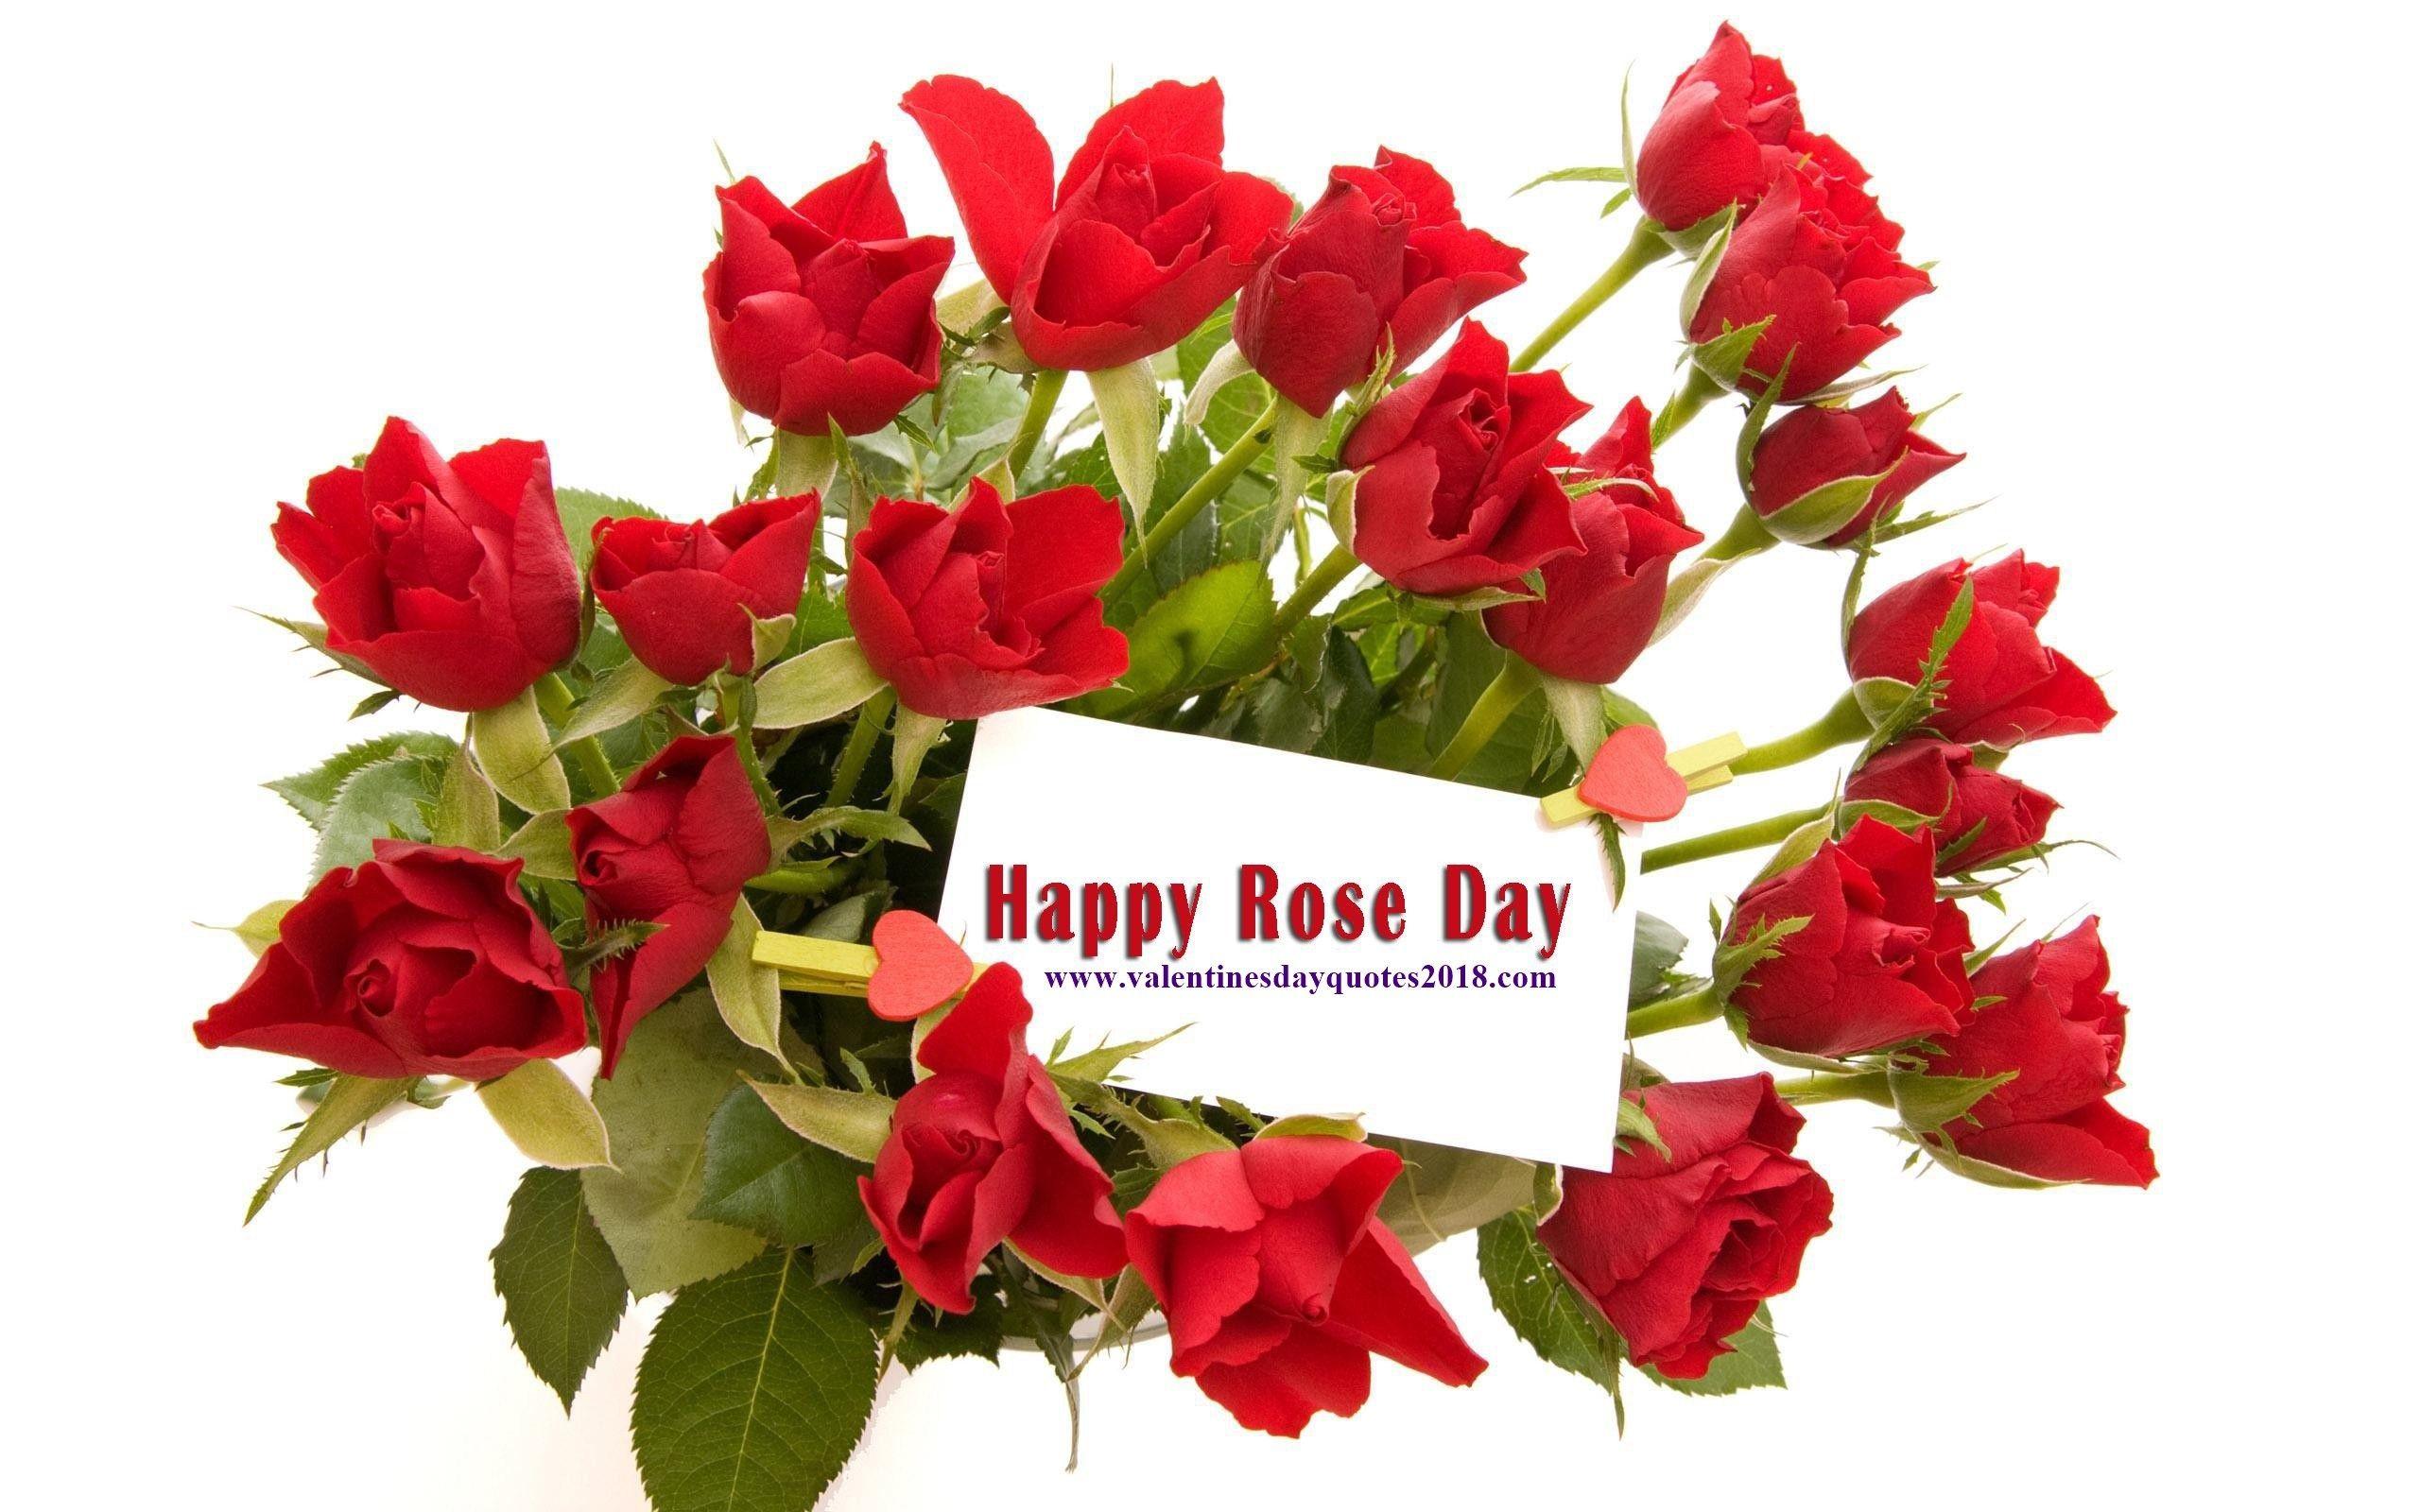 Happy Rose Day Image 2018 gif Pictures HD Wallpapers Graphics For